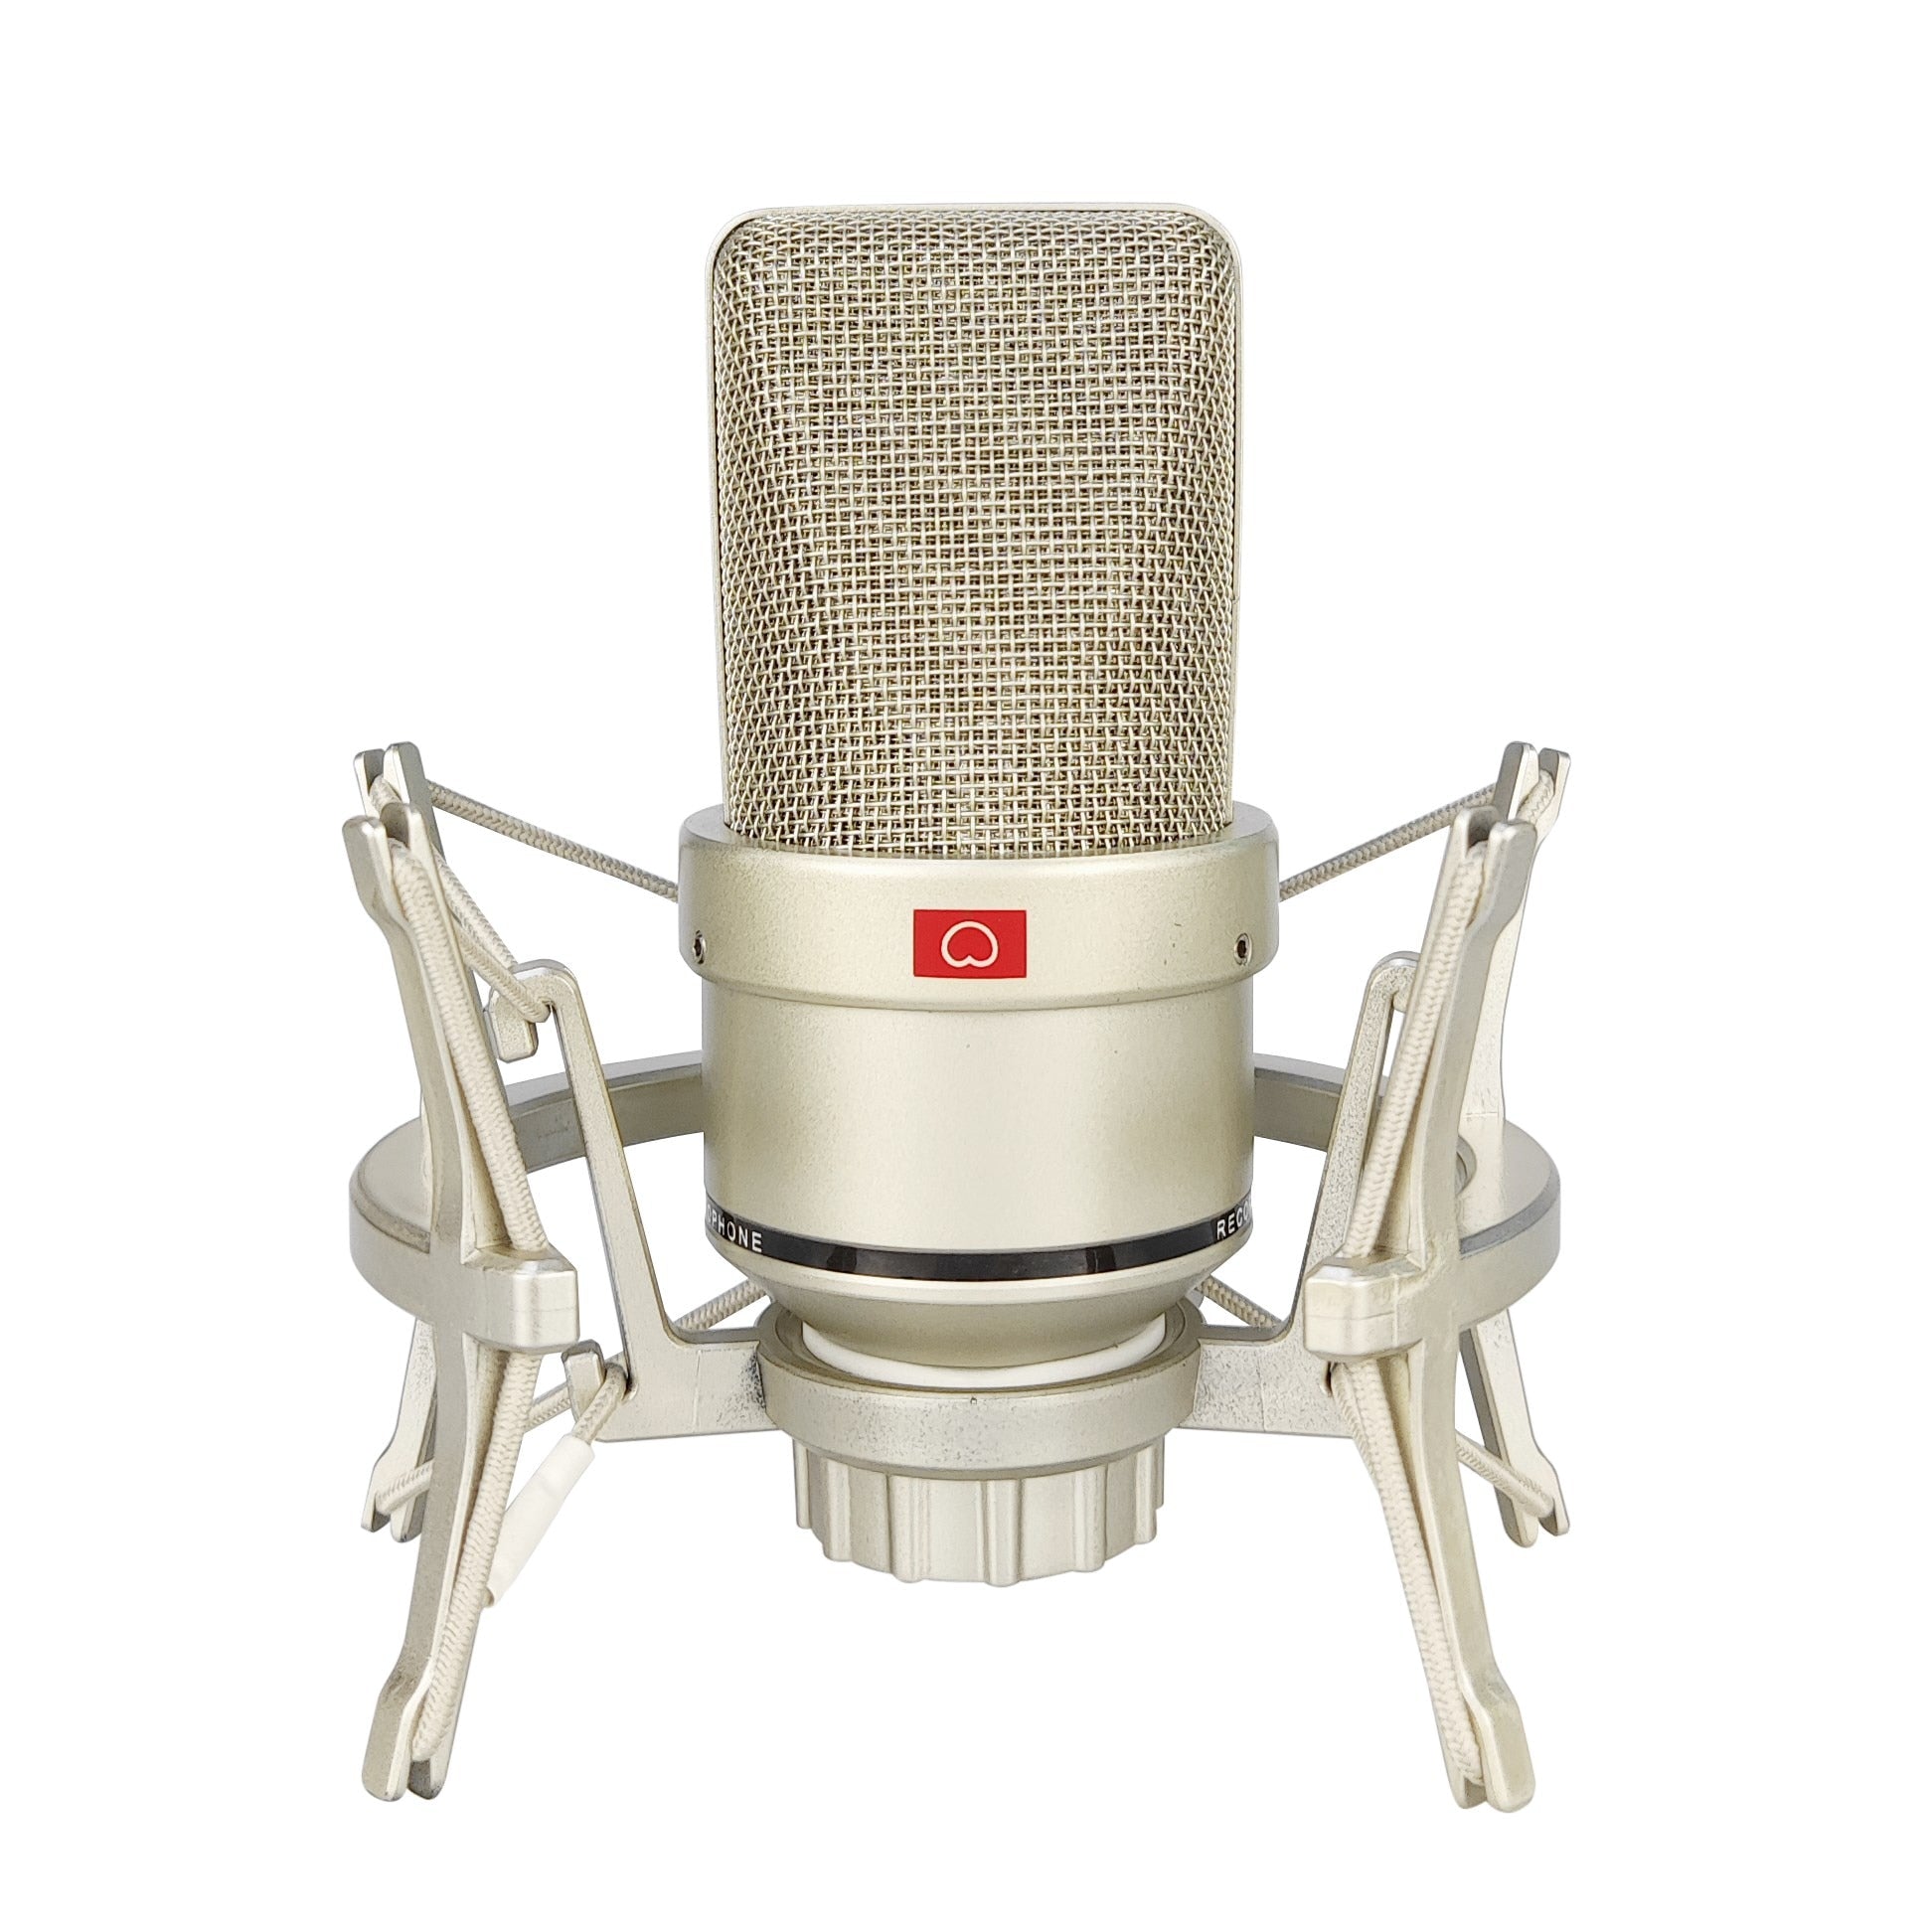 TLM103 Professional Condenser Microphone